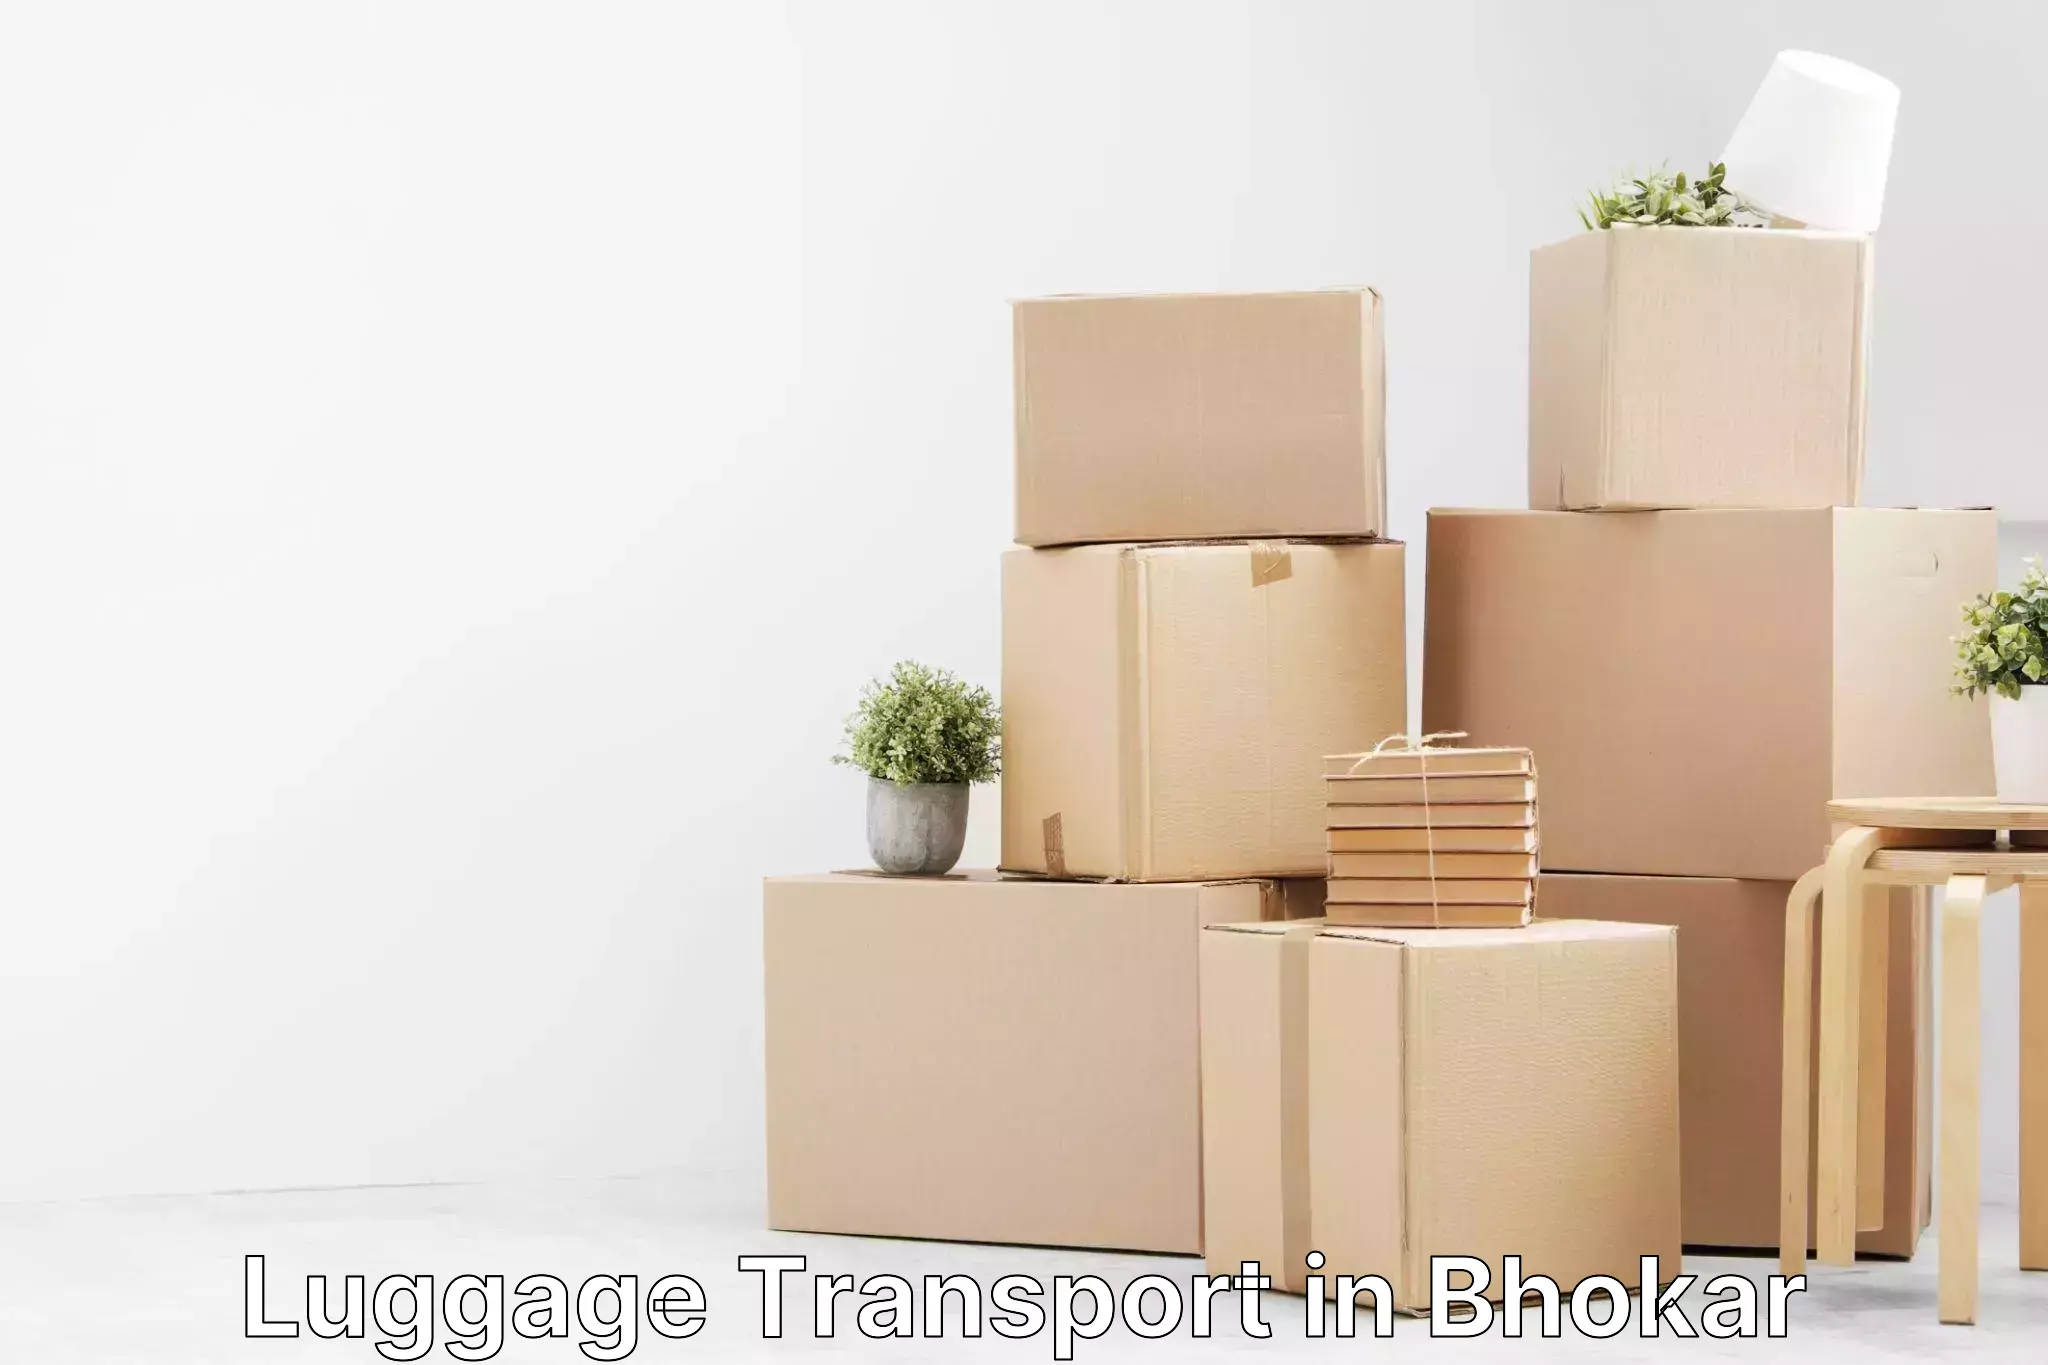 Luggage transport consulting in Bhokar